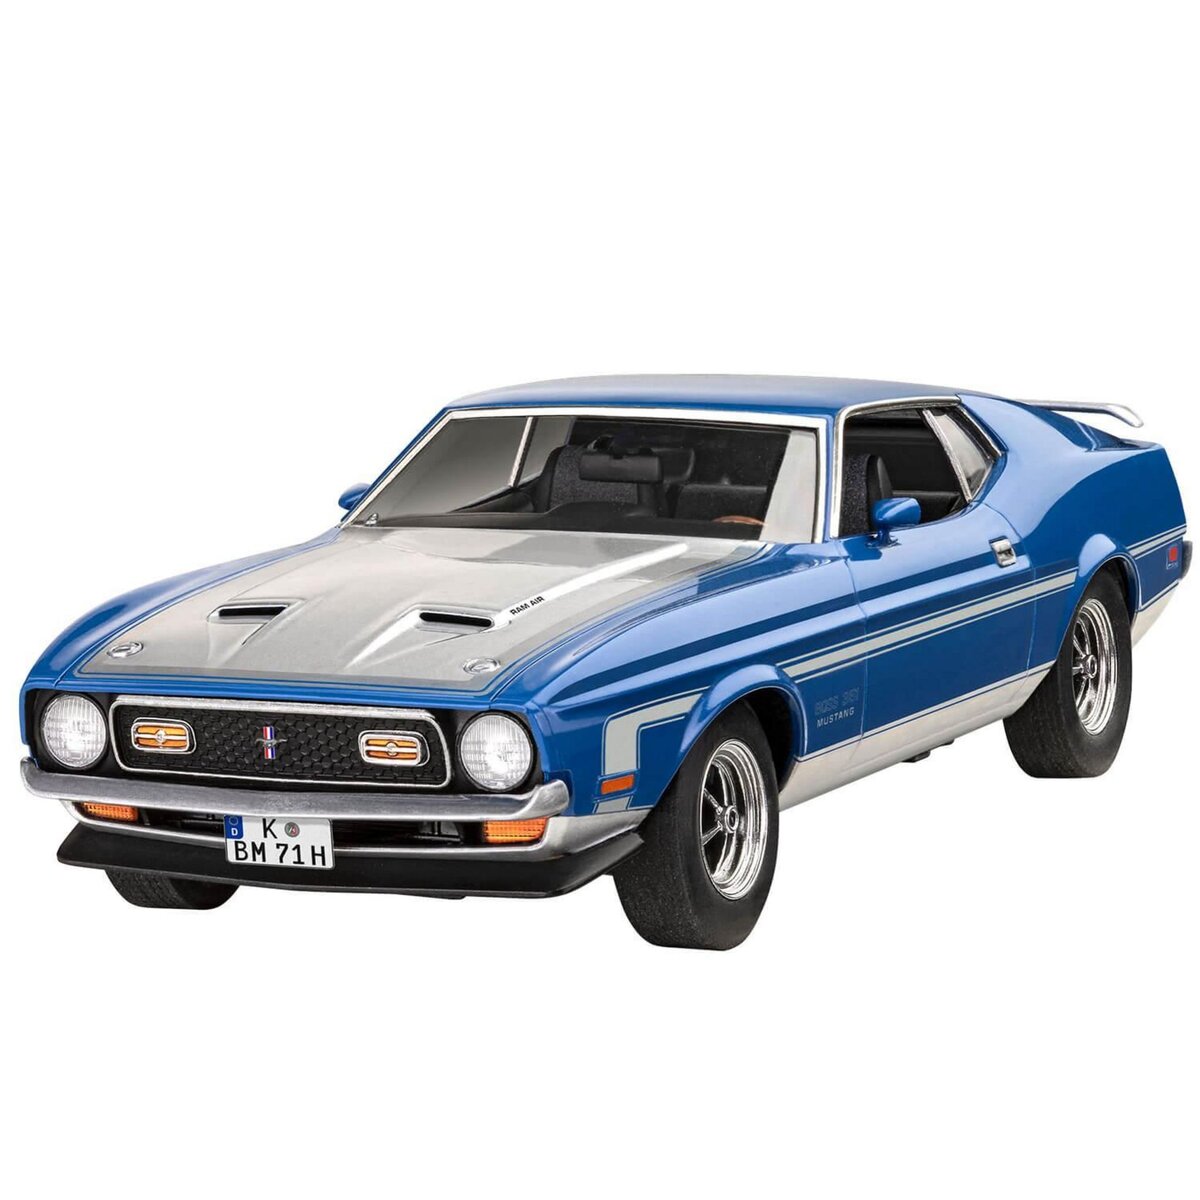 Revell Maquette voiture : Model Set :Ford Mustang Boss 351, 1971